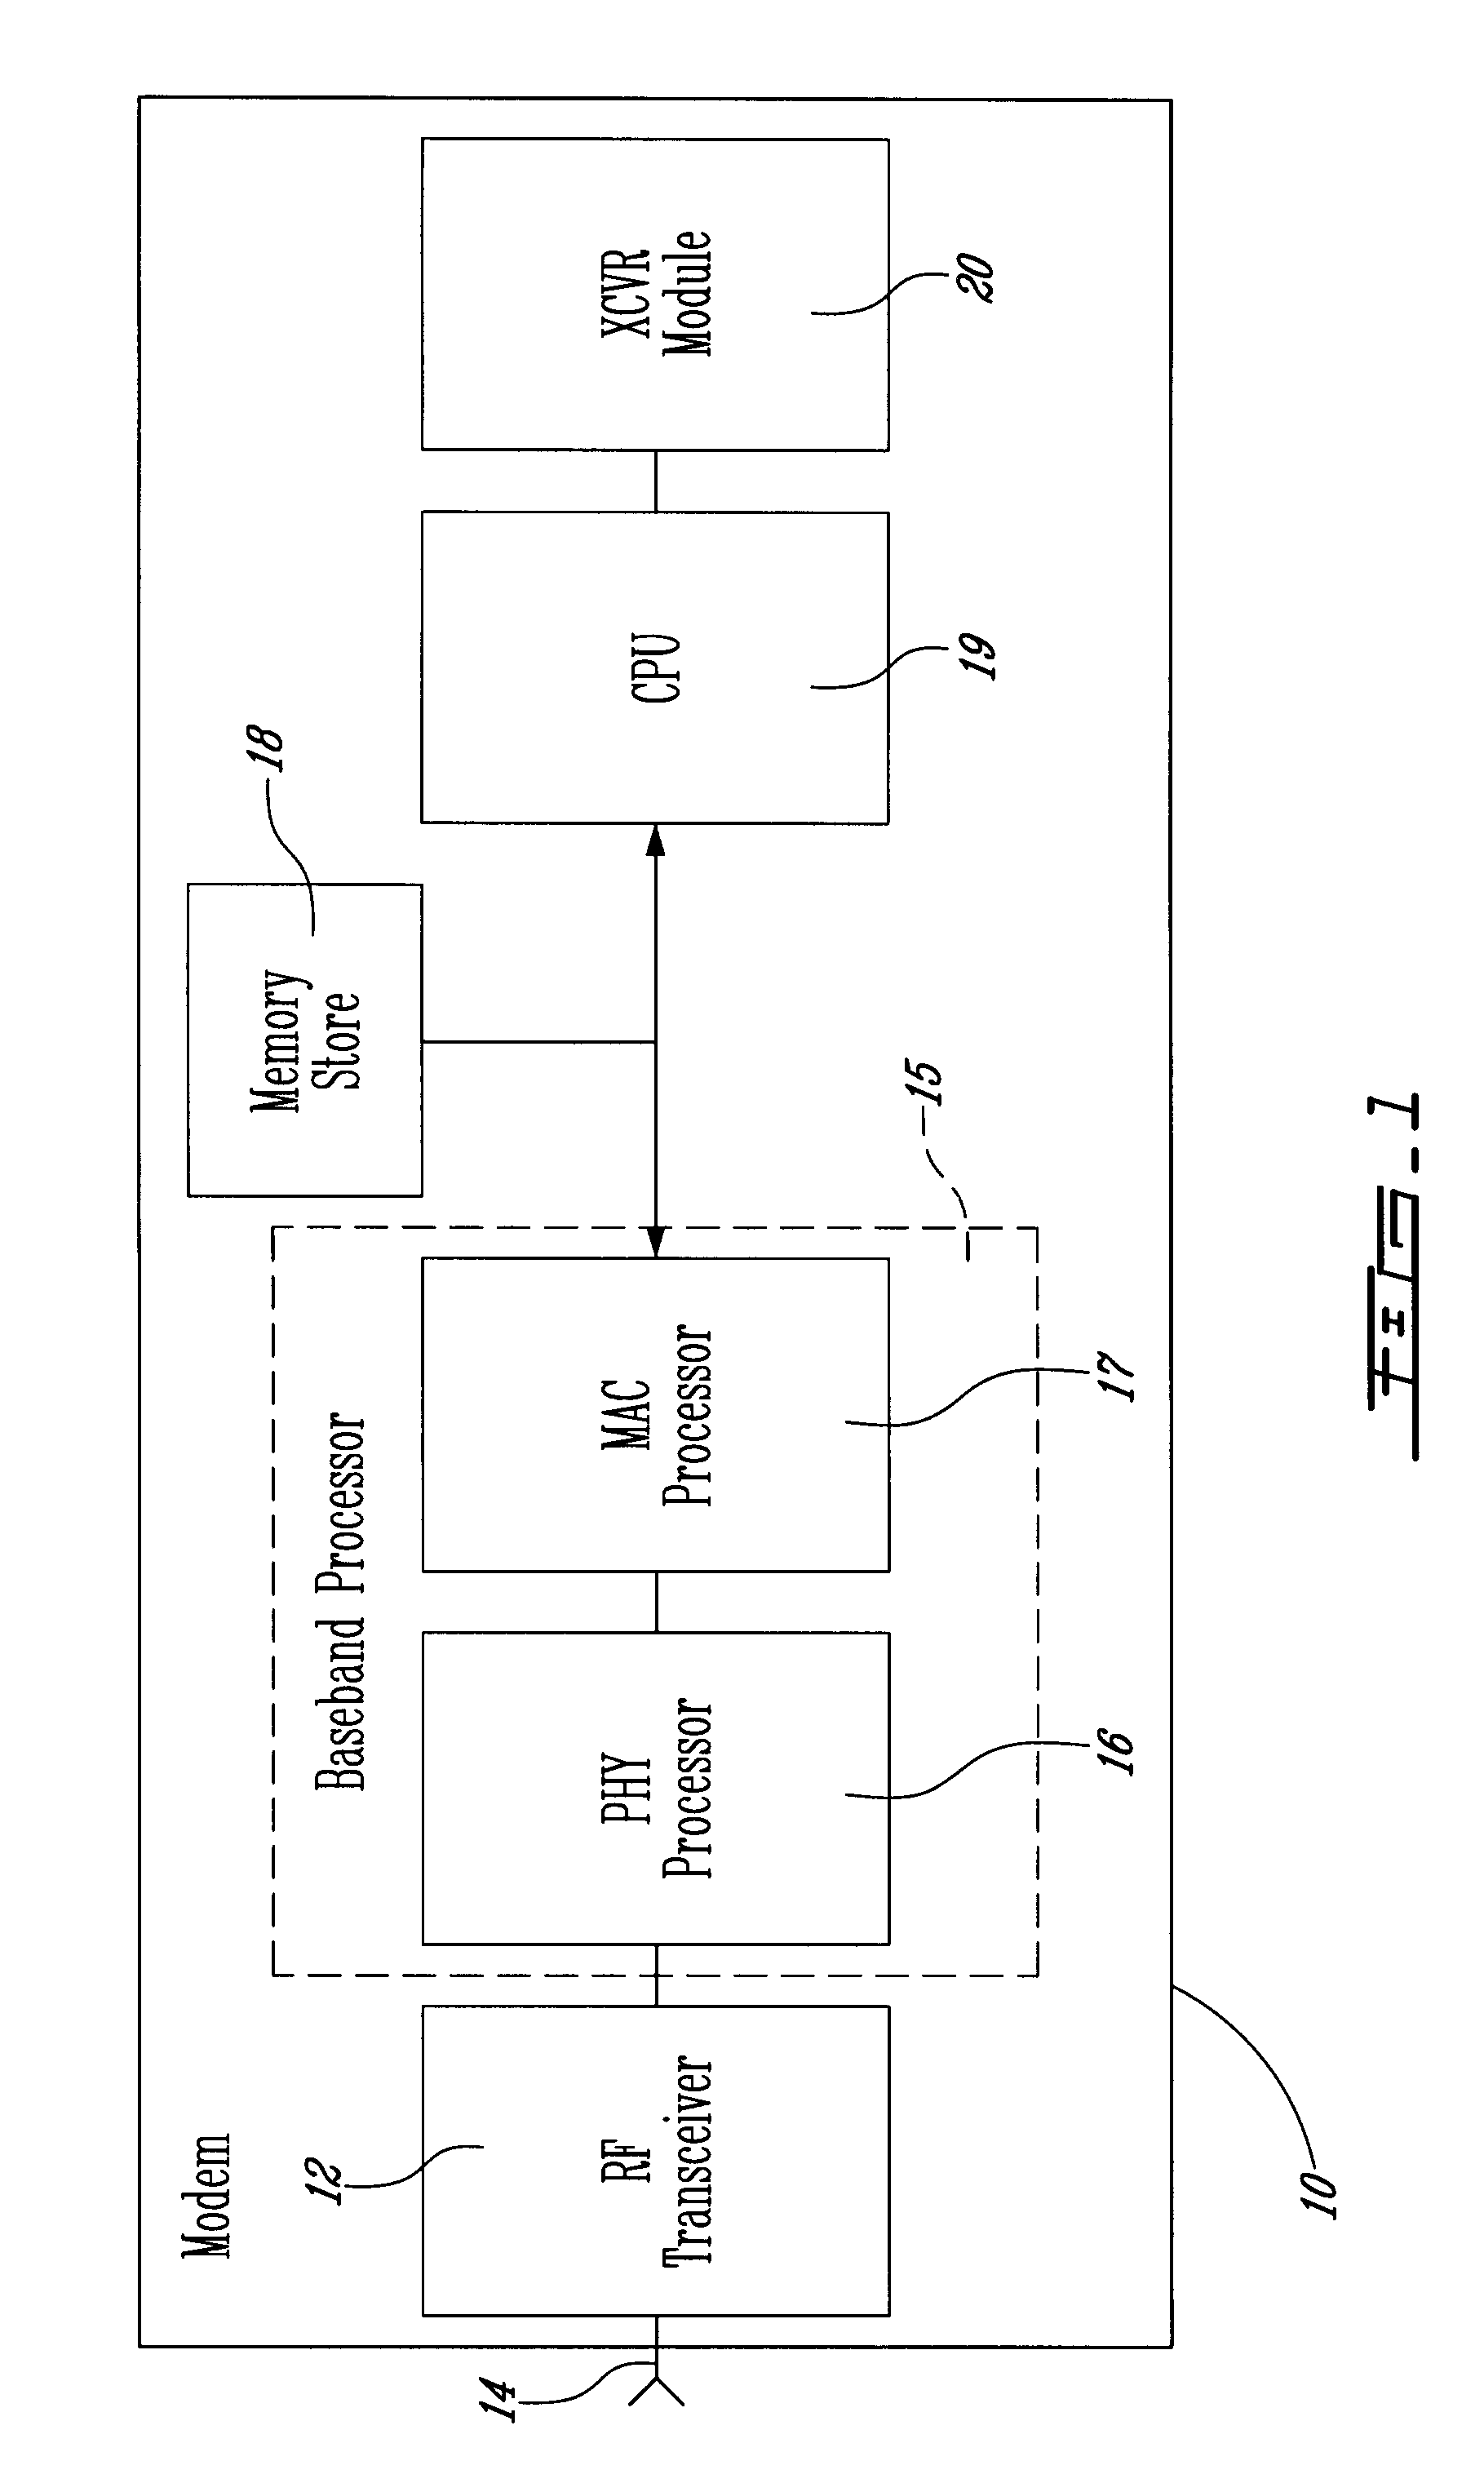 Signal processing unit and method, and corresponding transceiver